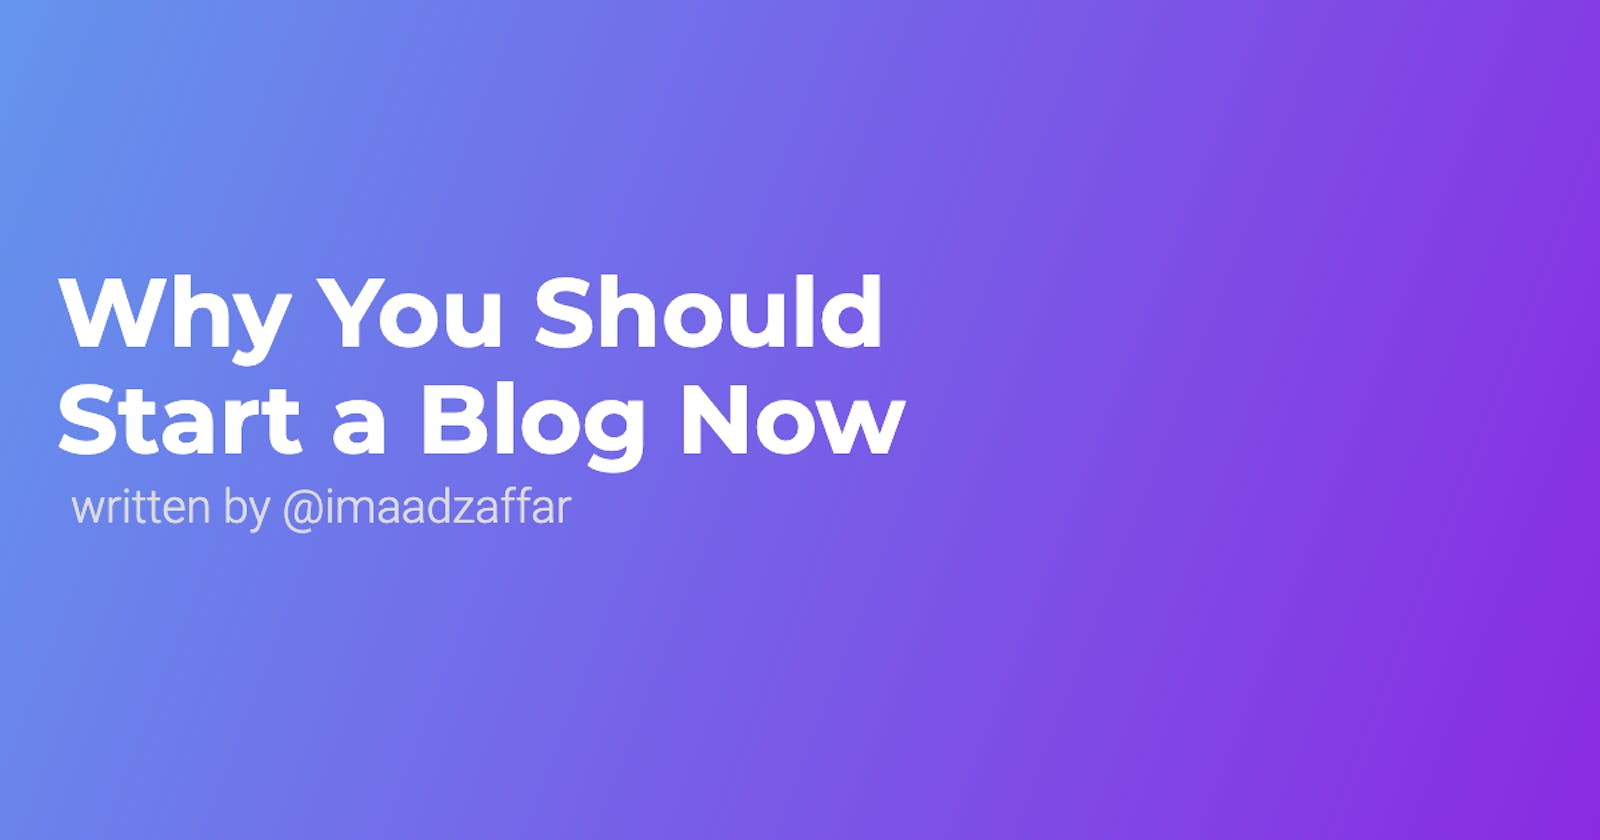 ✏️ Why You Should Start a Blog Now